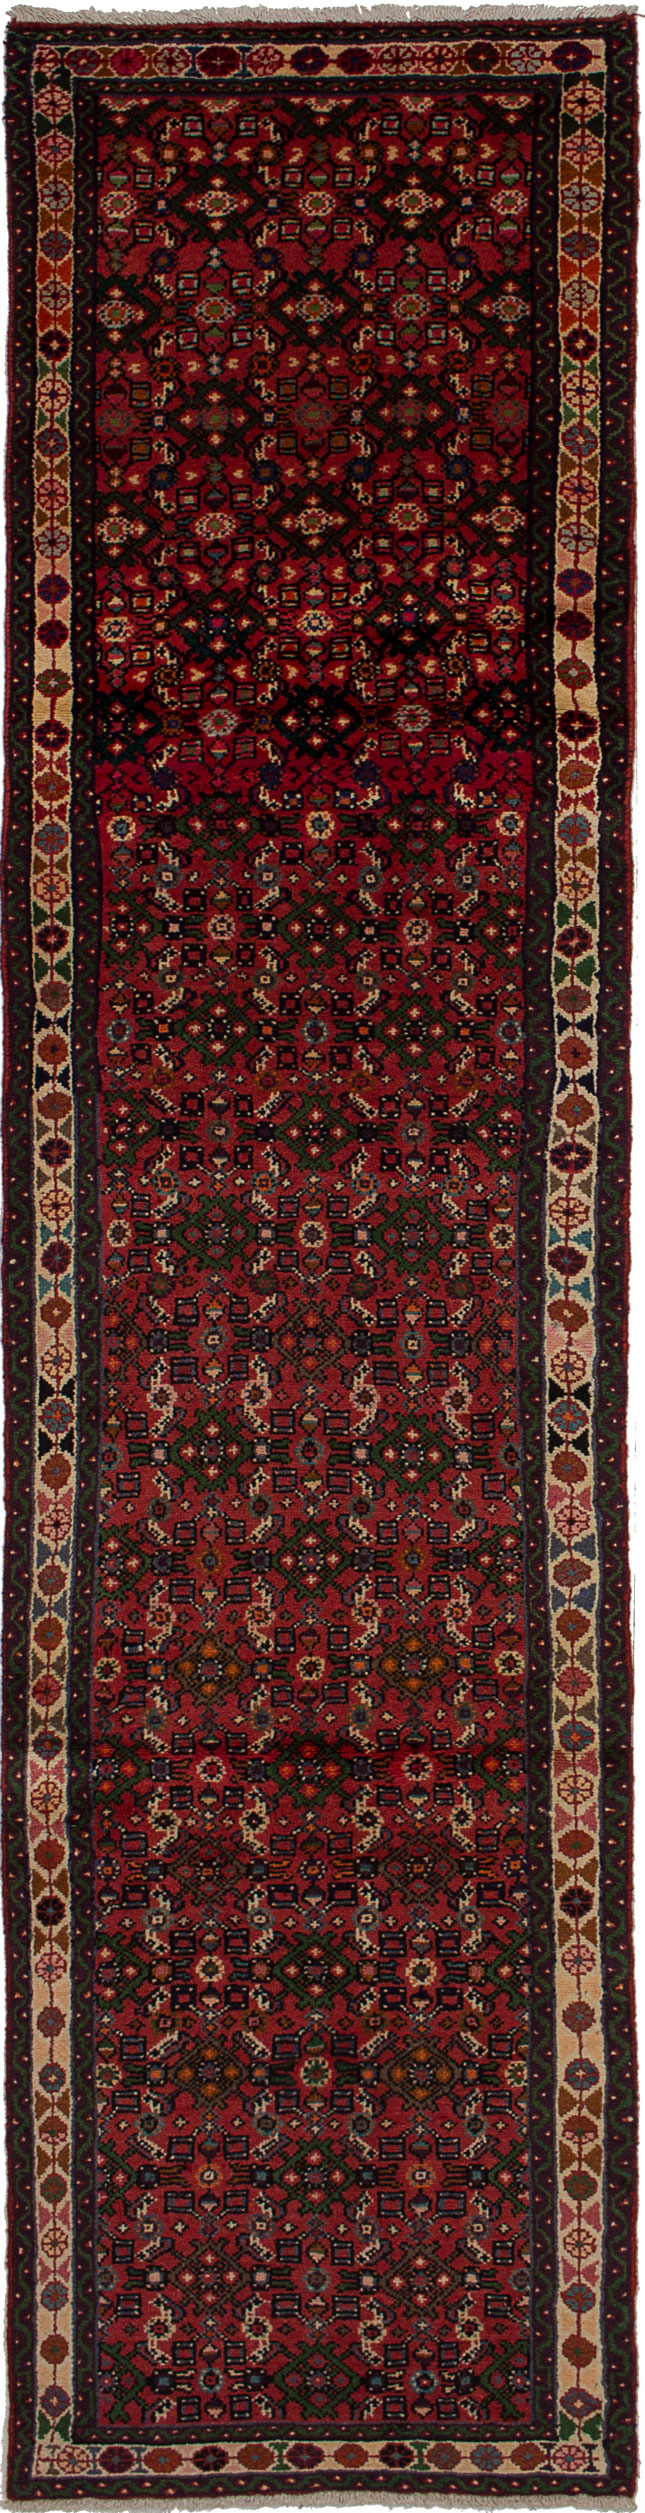 Hand-knotted Koliai Red Wool Rug 2'4" x 9'9" Size: 2'4" x 9'9"  